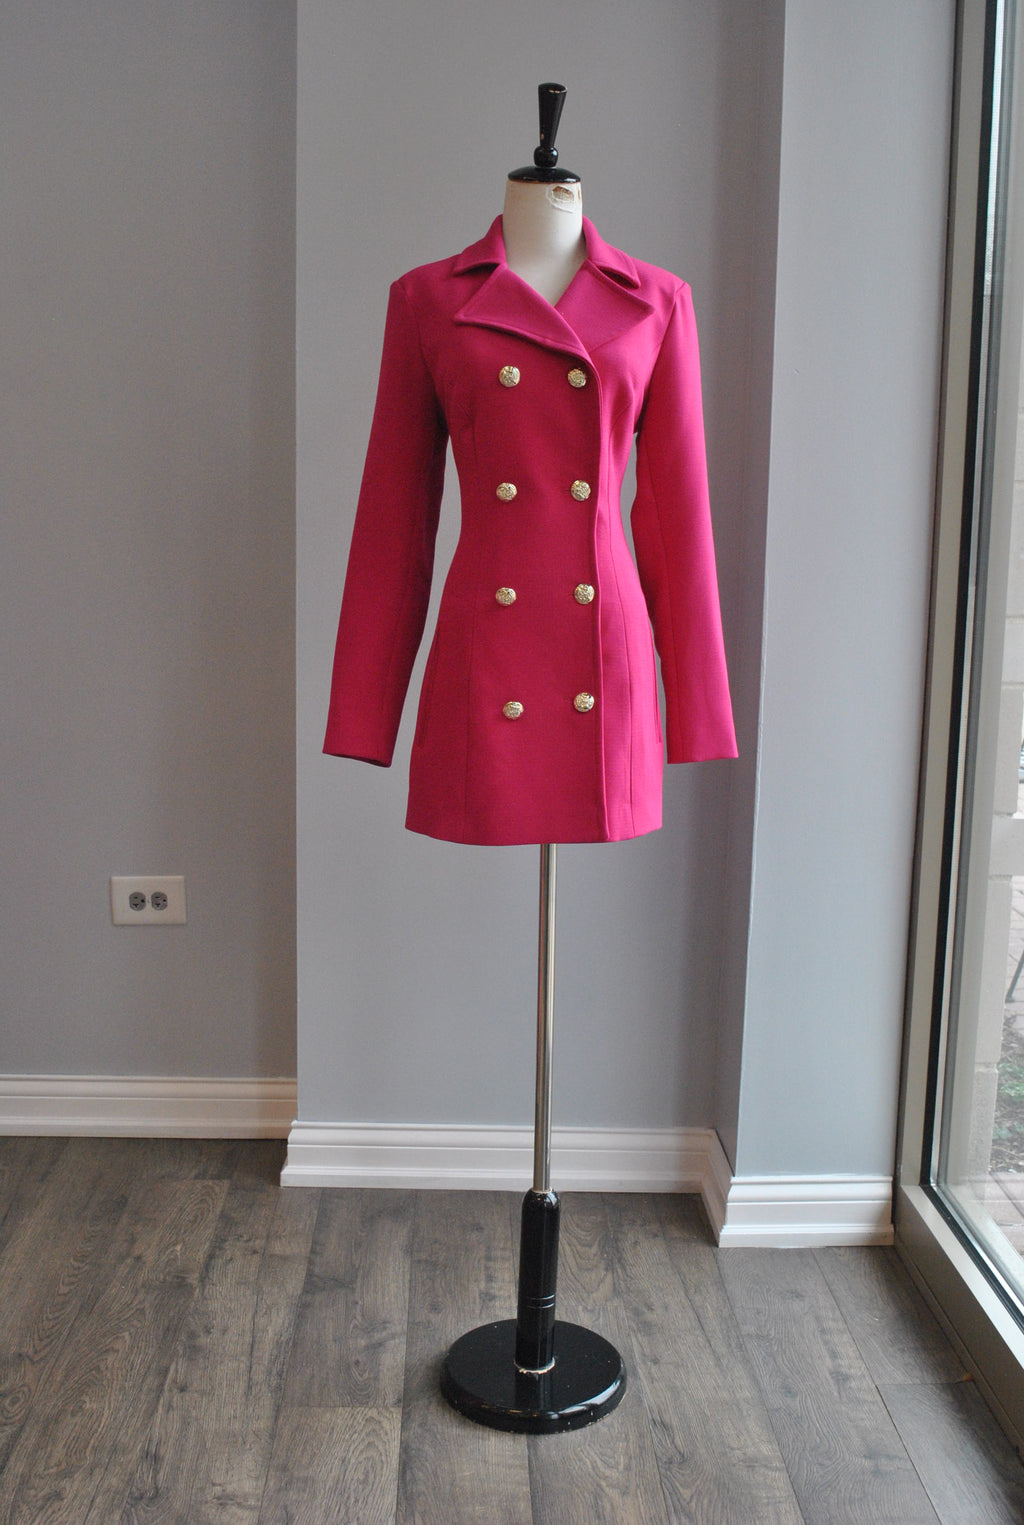 FUCHSIA SPRING DOUBLE BREASTED JACKET